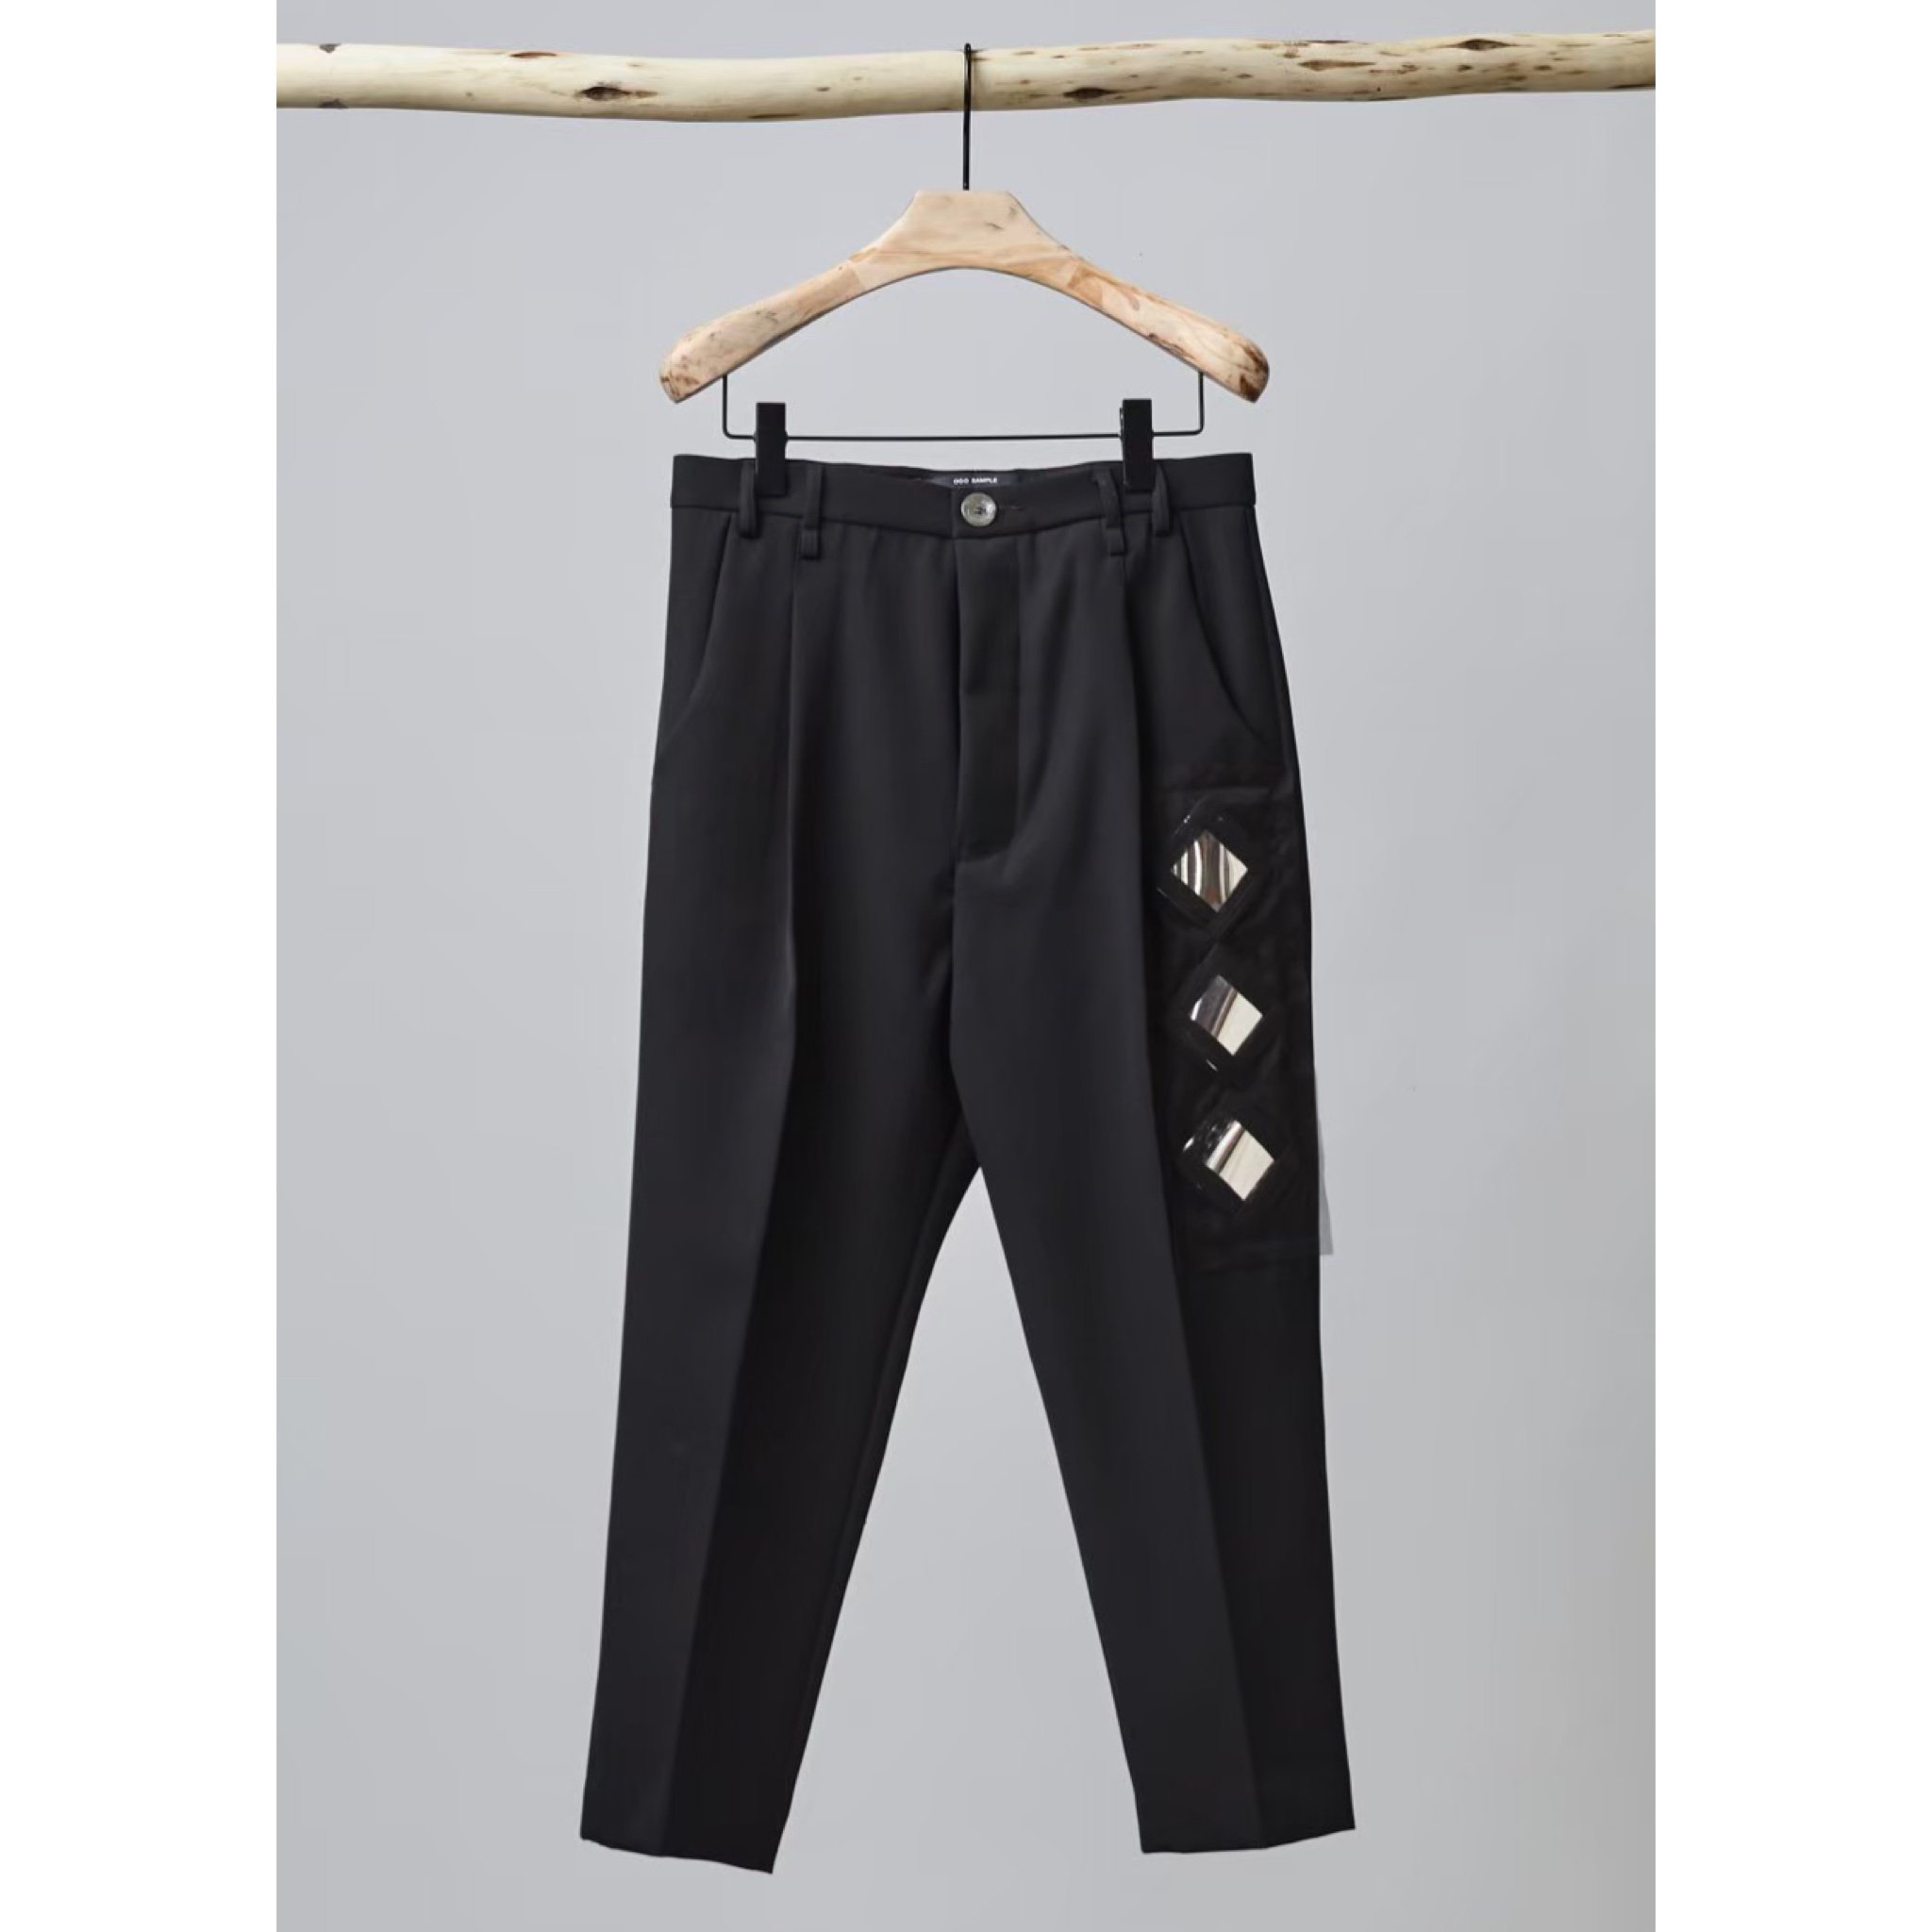 <img class='new_mark_img1' src='https://img.shop-pro.jp/img/new/icons20.gif' style='border:none;display:inline;margin:0px;padding:0px;width:auto;' />SONG FOR THE MUTEMIRROR PANTS -WOOL GABARDINE-